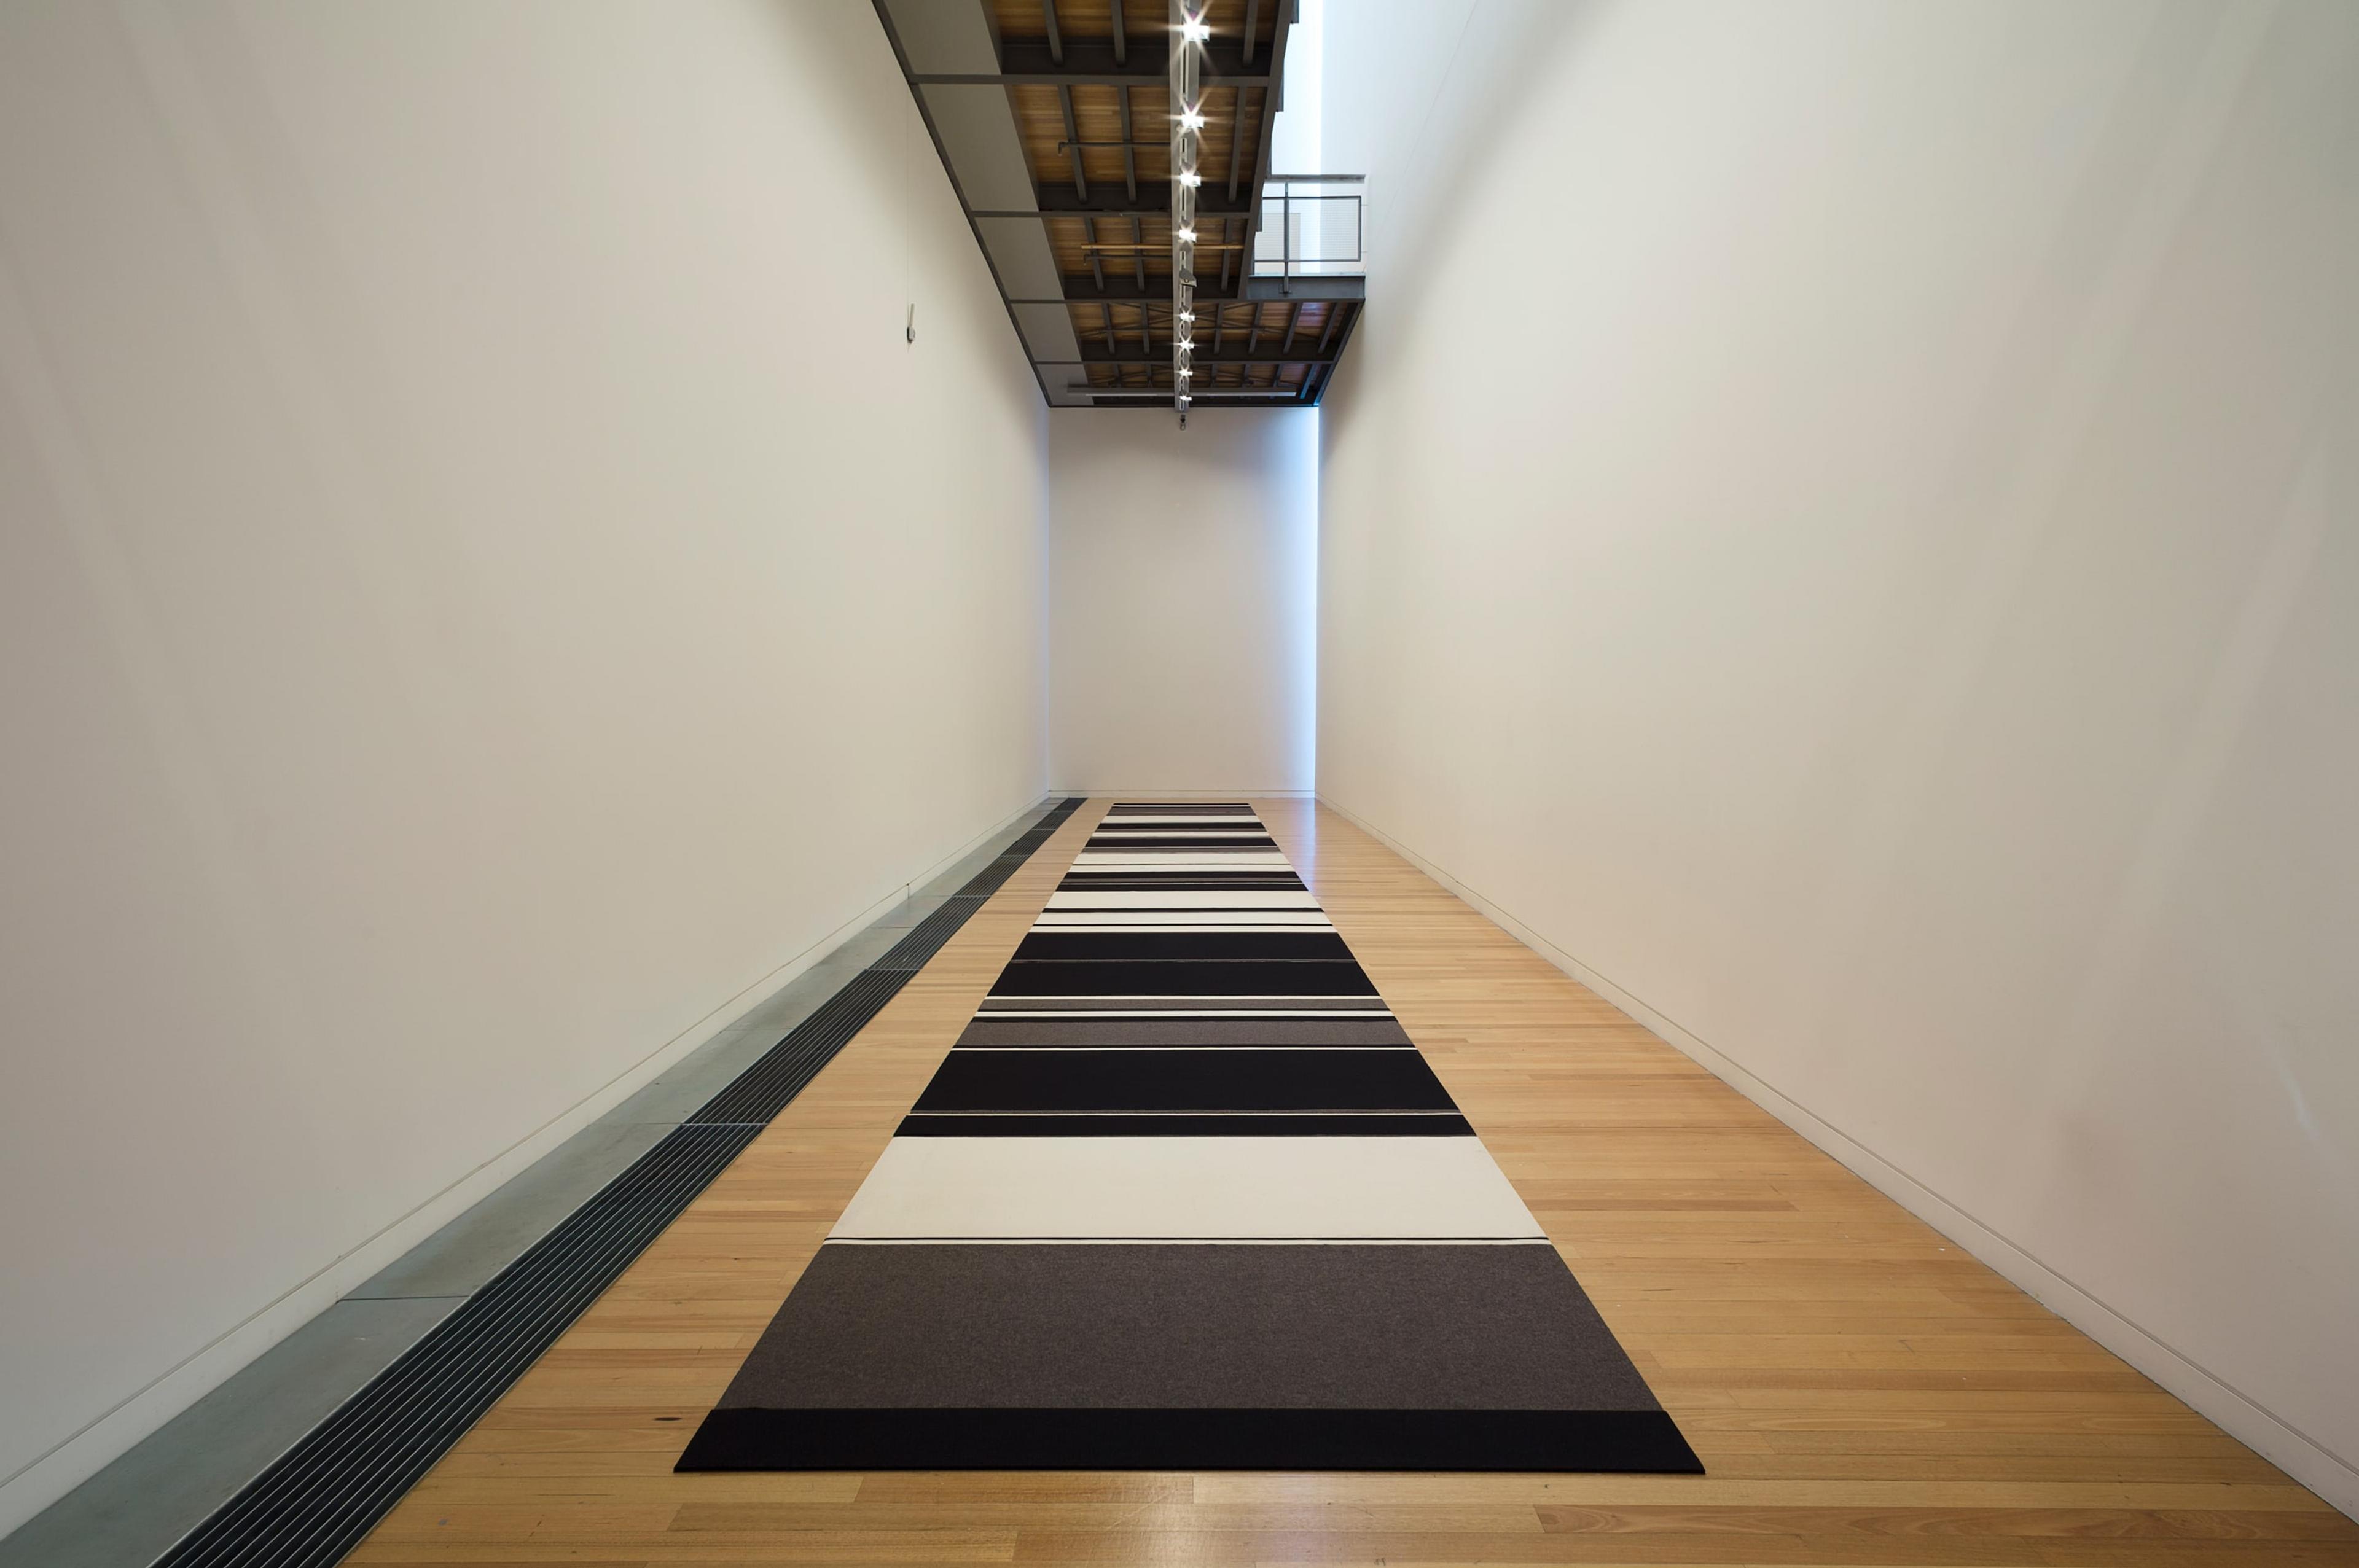 Peter Robinson, Cuts and Junctures, 2013, cut wool felt, installation dimensions variable, at the Adam Art Gallery. Courtesy the artist and Peter McLeavey Gallery, Wellington. Photo: Shaun Waugh